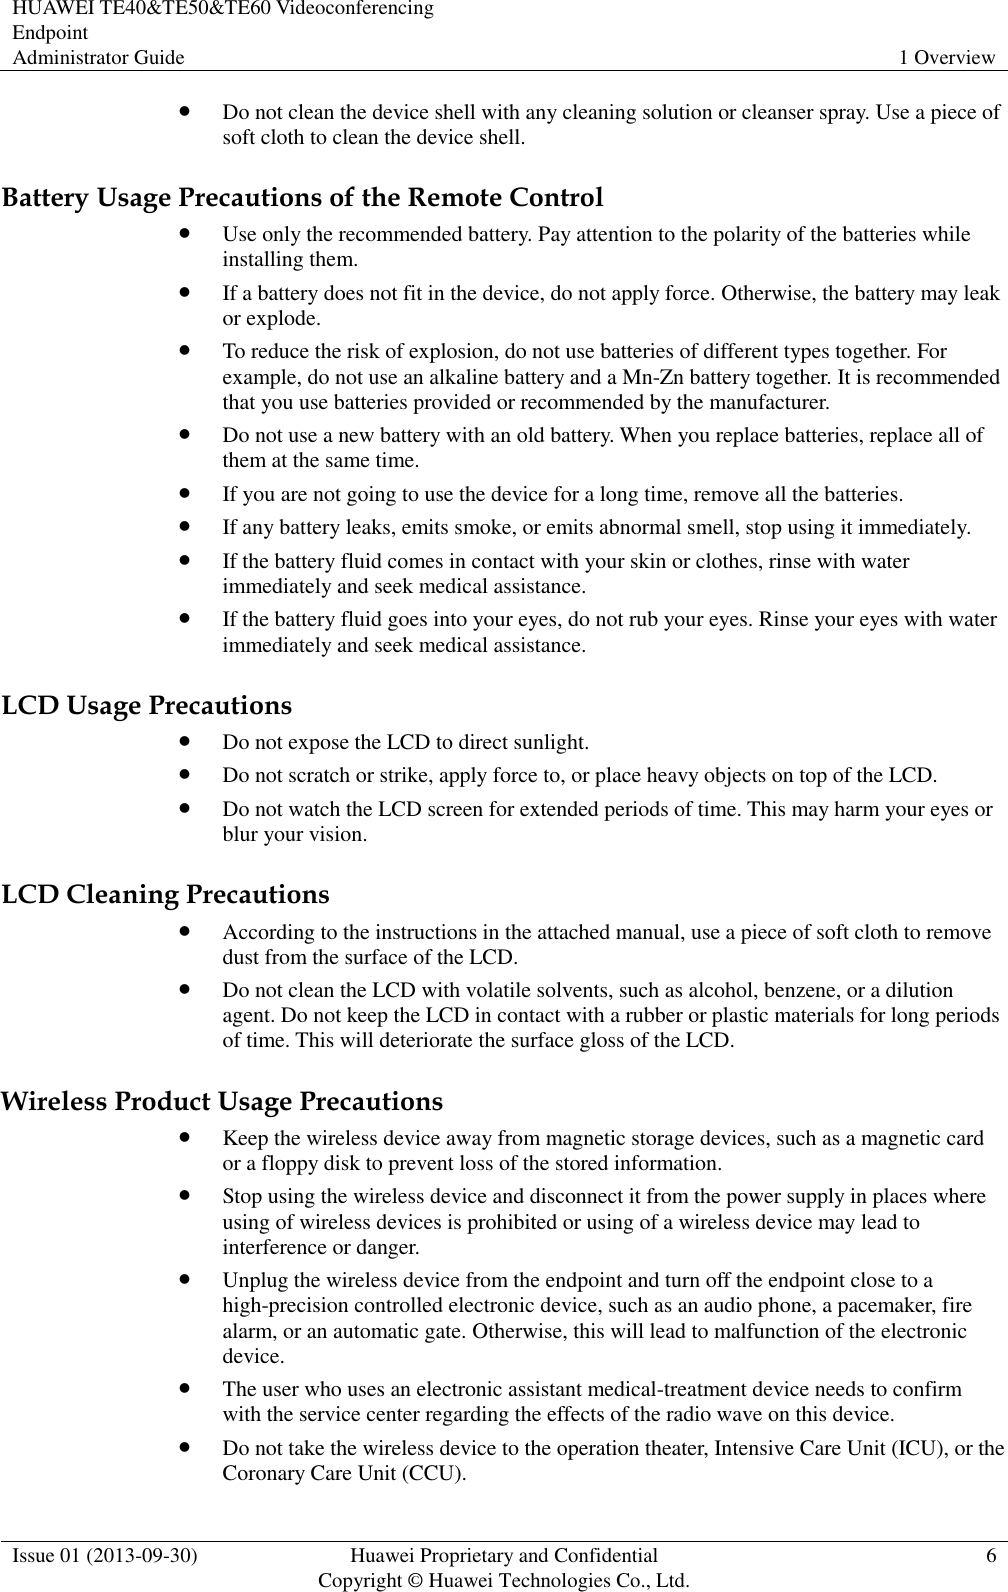 HUAWEI TE40&amp;TE50&amp;TE60 Videoconferencing Endpoint Administrator Guide 1 Overview  Issue 01 (2013-09-30) Huawei Proprietary and Confidential                                     Copyright © Huawei Technologies Co., Ltd. 6   Do not clean the device shell with any cleaning solution or cleanser spray. Use a piece of soft cloth to clean the device shell. Battery Usage Precautions of the Remote Control  Use only the recommended battery. Pay attention to the polarity of the batteries while installing them.  If a battery does not fit in the device, do not apply force. Otherwise, the battery may leak or explode.  To reduce the risk of explosion, do not use batteries of different types together. For example, do not use an alkaline battery and a Mn-Zn battery together. It is recommended that you use batteries provided or recommended by the manufacturer.  Do not use a new battery with an old battery. When you replace batteries, replace all of them at the same time.  If you are not going to use the device for a long time, remove all the batteries.  If any battery leaks, emits smoke, or emits abnormal smell, stop using it immediately.  If the battery fluid comes in contact with your skin or clothes, rinse with water immediately and seek medical assistance.  If the battery fluid goes into your eyes, do not rub your eyes. Rinse your eyes with water immediately and seek medical assistance. LCD Usage Precautions  Do not expose the LCD to direct sunlight.  Do not scratch or strike, apply force to, or place heavy objects on top of the LCD.  Do not watch the LCD screen for extended periods of time. This may harm your eyes or blur your vision. LCD Cleaning Precautions  According to the instructions in the attached manual, use a piece of soft cloth to remove dust from the surface of the LCD.  Do not clean the LCD with volatile solvents, such as alcohol, benzene, or a dilution agent. Do not keep the LCD in contact with a rubber or plastic materials for long periods of time. This will deteriorate the surface gloss of the LCD. Wireless Product Usage Precautions  Keep the wireless device away from magnetic storage devices, such as a magnetic card or a floppy disk to prevent loss of the stored information.  Stop using the wireless device and disconnect it from the power supply in places where using of wireless devices is prohibited or using of a wireless device may lead to interference or danger.  Unplug the wireless device from the endpoint and turn off the endpoint close to a high-precision controlled electronic device, such as an audio phone, a pacemaker, fire alarm, or an automatic gate. Otherwise, this will lead to malfunction of the electronic device.  The user who uses an electronic assistant medical-treatment device needs to confirm with the service center regarding the effects of the radio wave on this device.  Do not take the wireless device to the operation theater, Intensive Care Unit (ICU), or the Coronary Care Unit (CCU). 